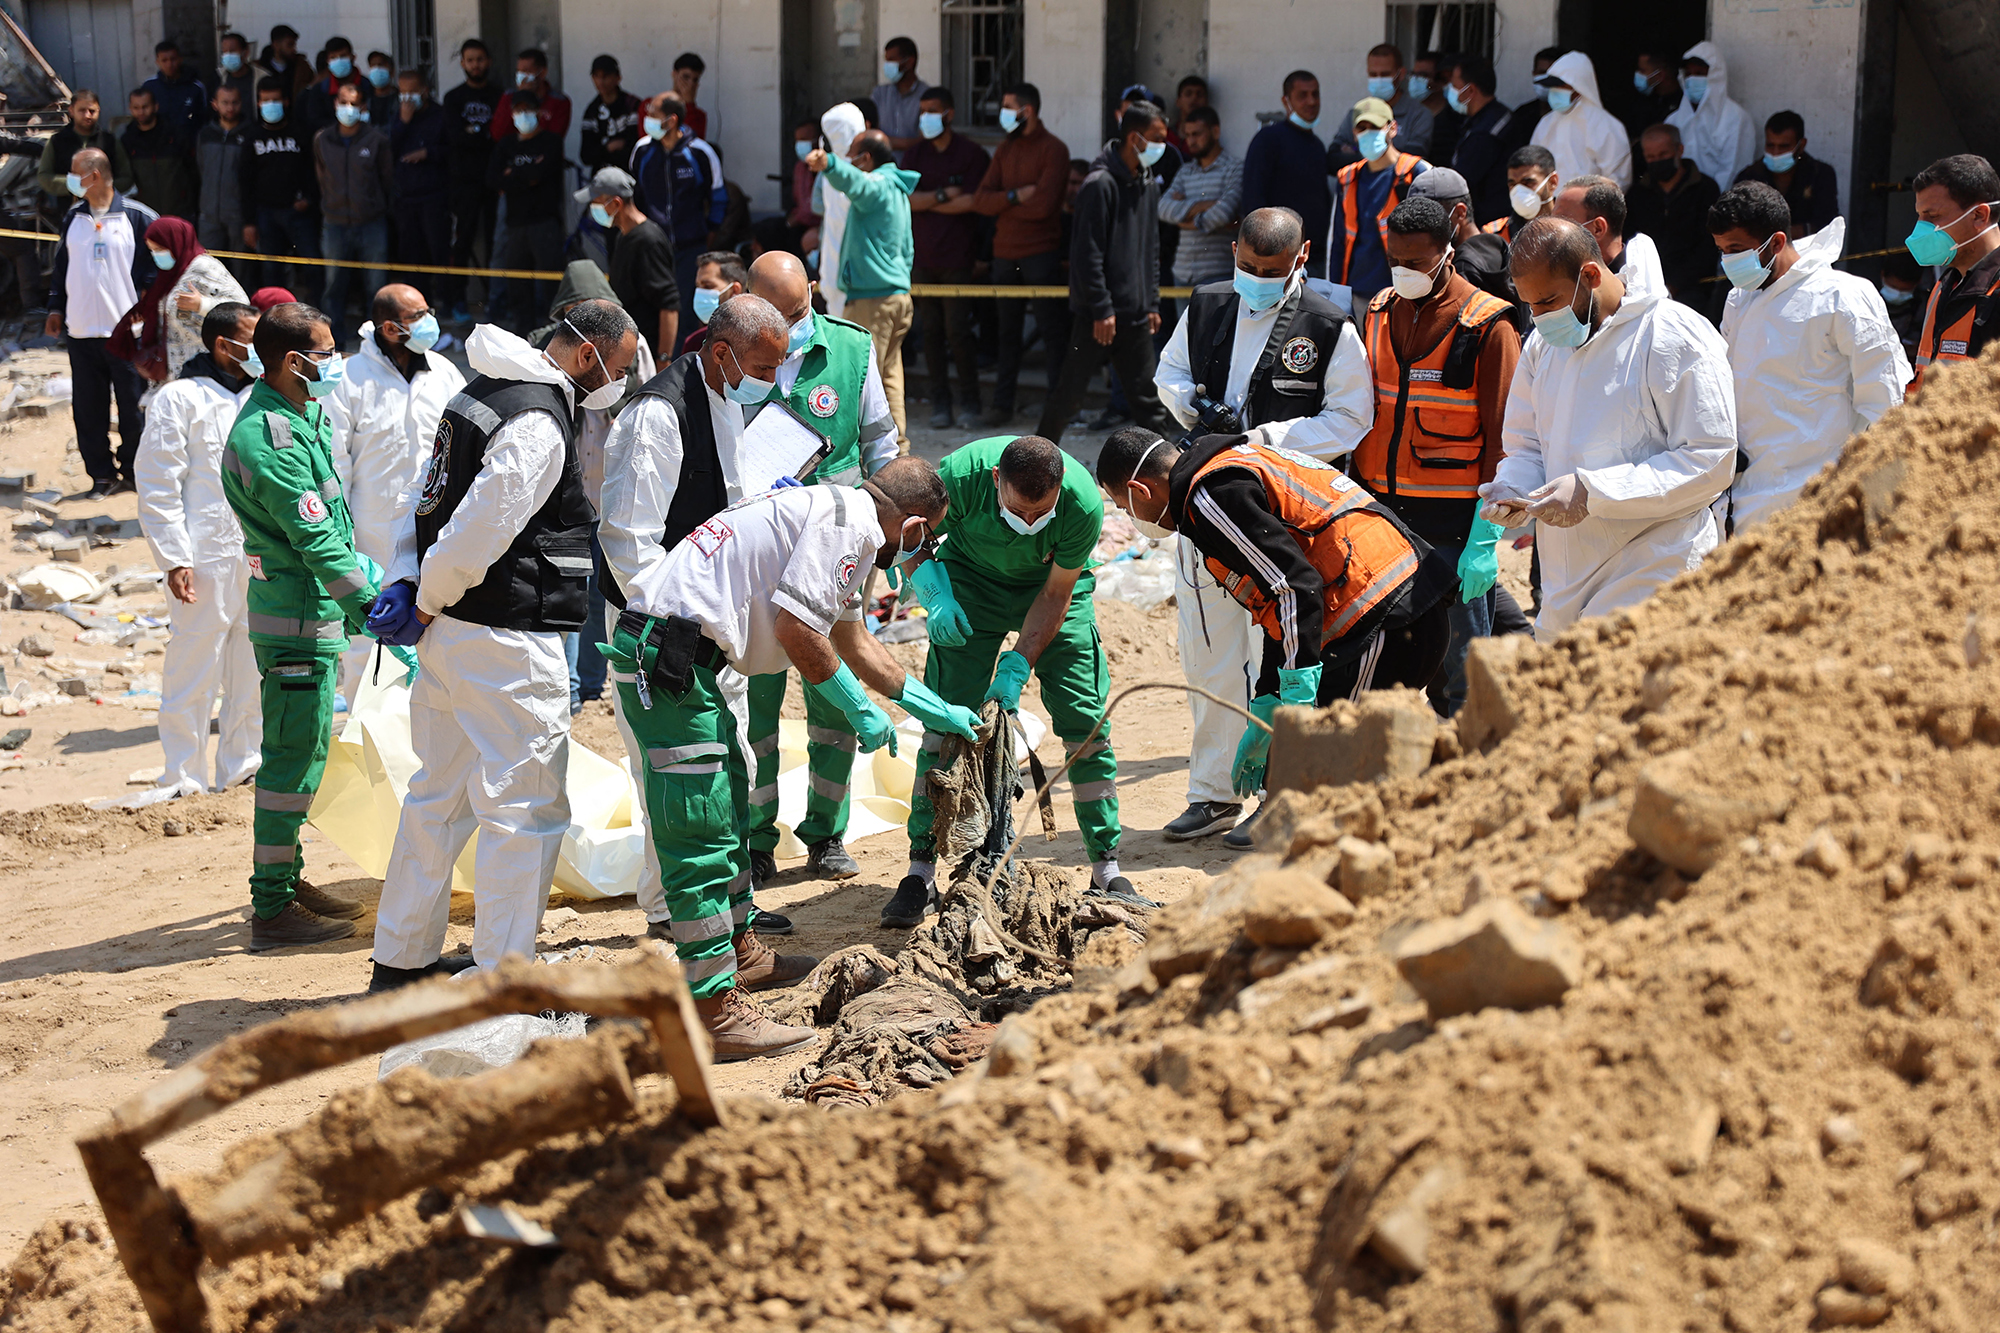 Palestinian forensic and civil defence recover human remains at the grounds of Al-Shifa hospital, Gaza, on April 8.